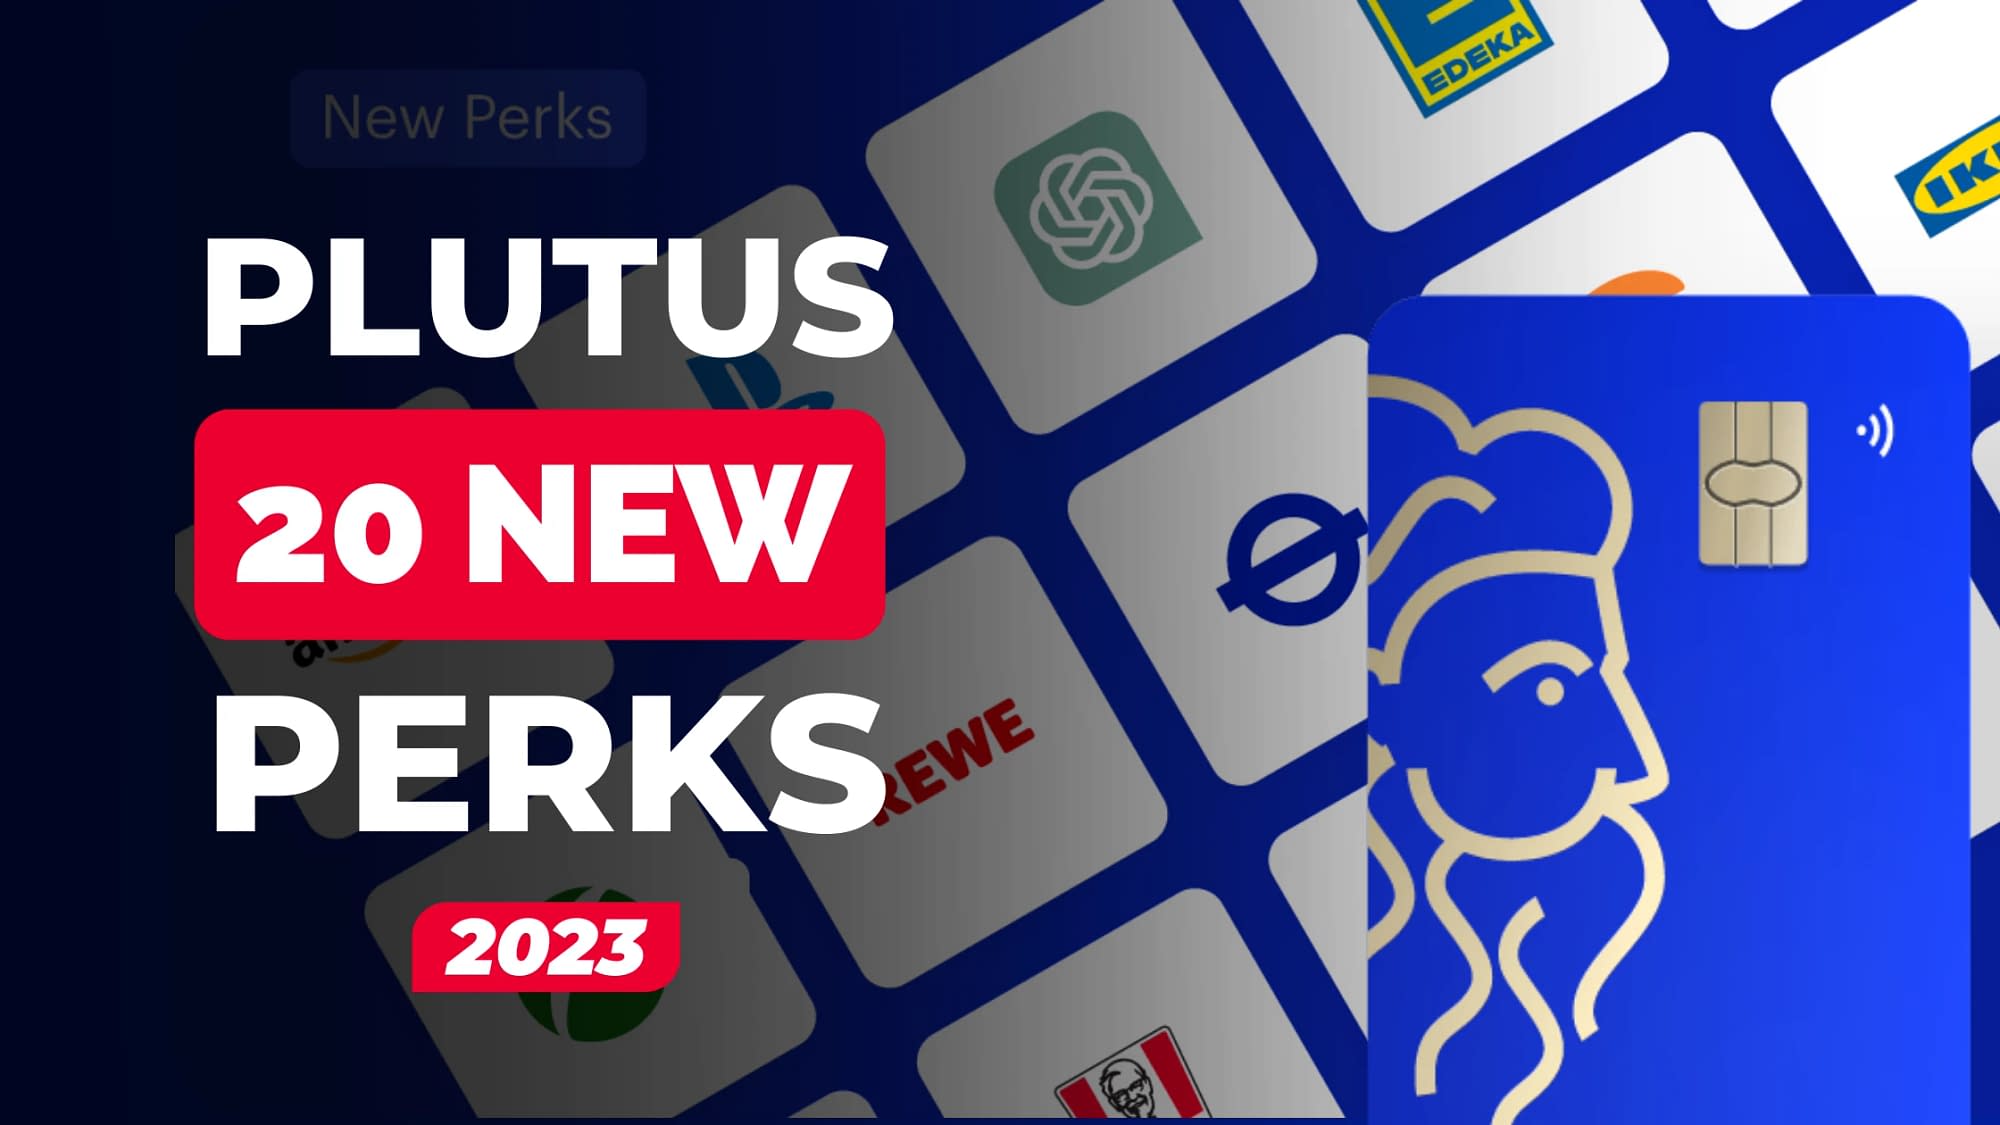 Plutus added ChatGPT and Twitter Blue totalling 20 new perks for the Plutus Card